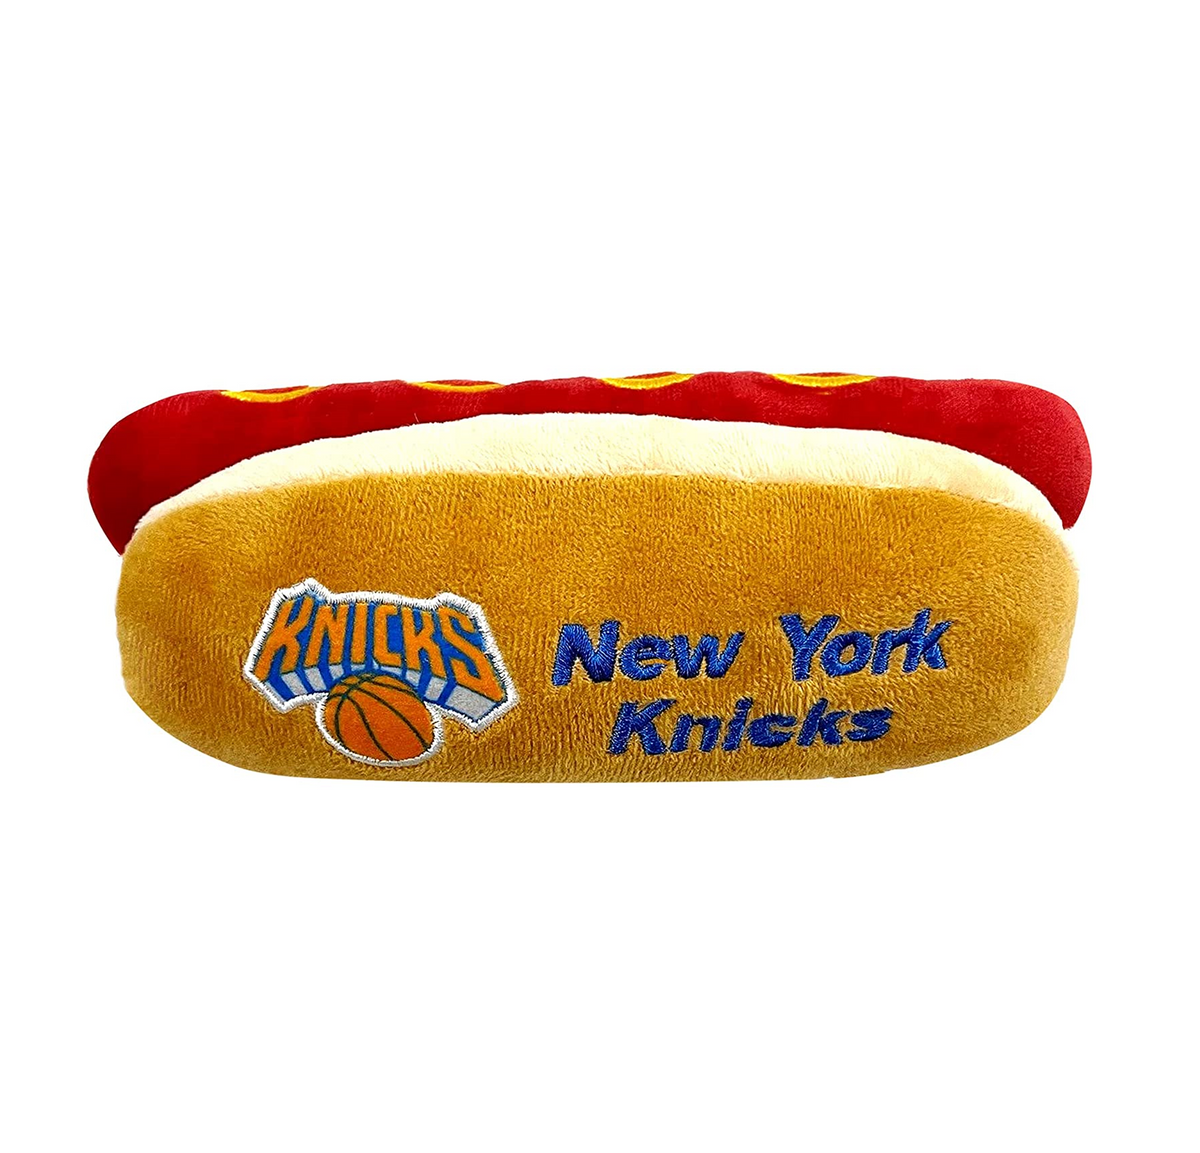 New York Knicks Hot Dog Plush Toys - 3 Red Rovers